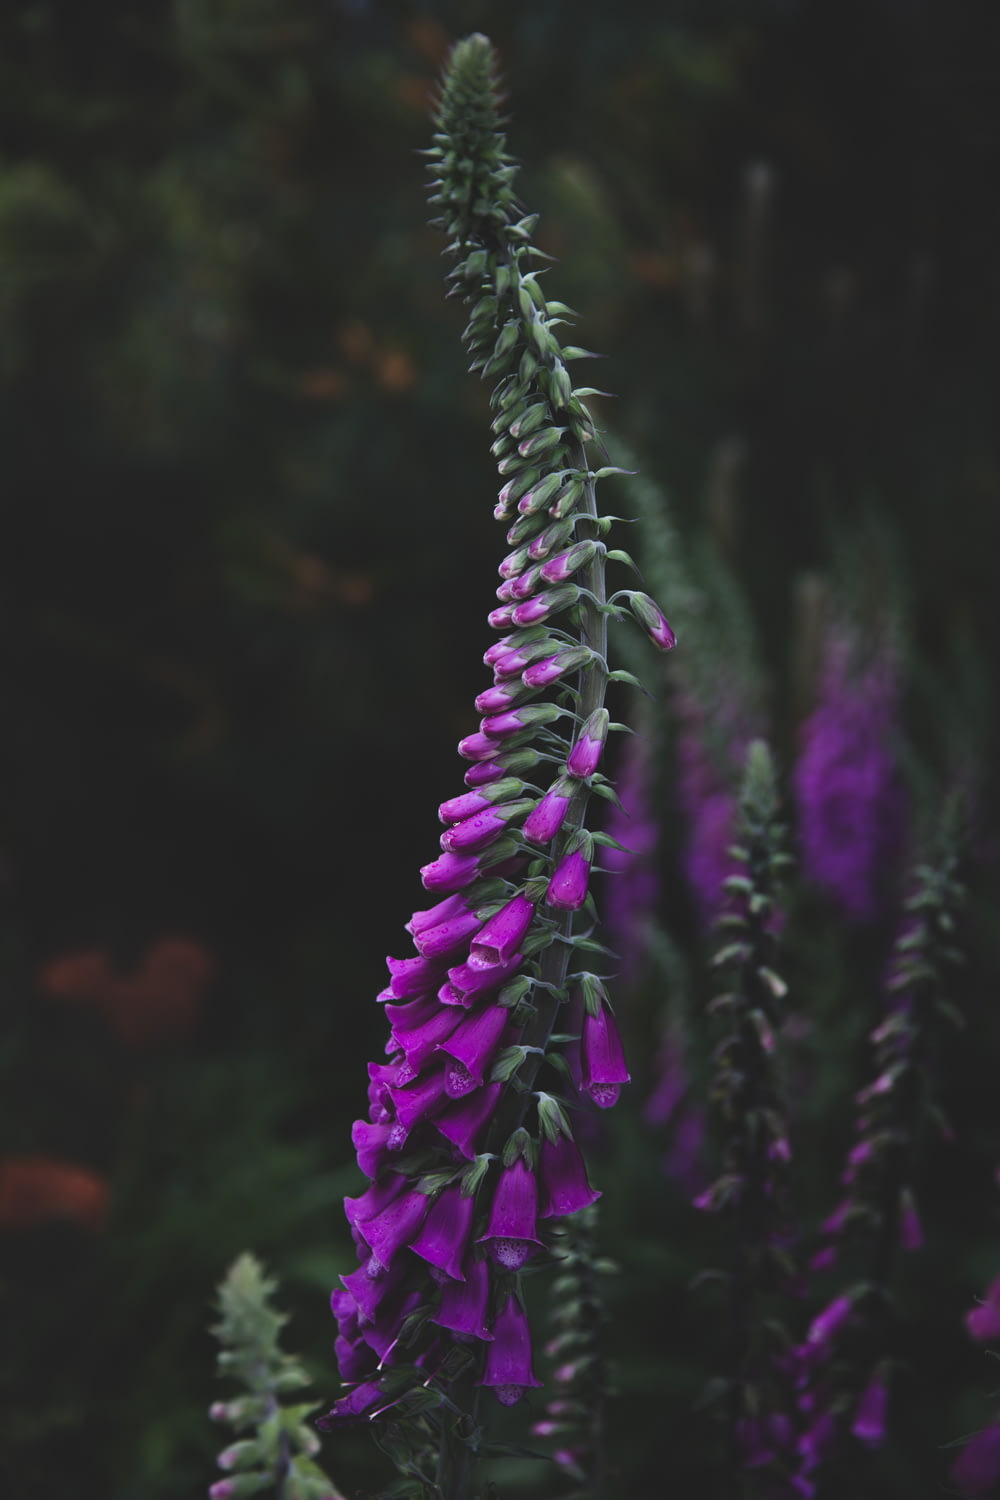 shallow focus photography of green-leafed plant with purple flowers